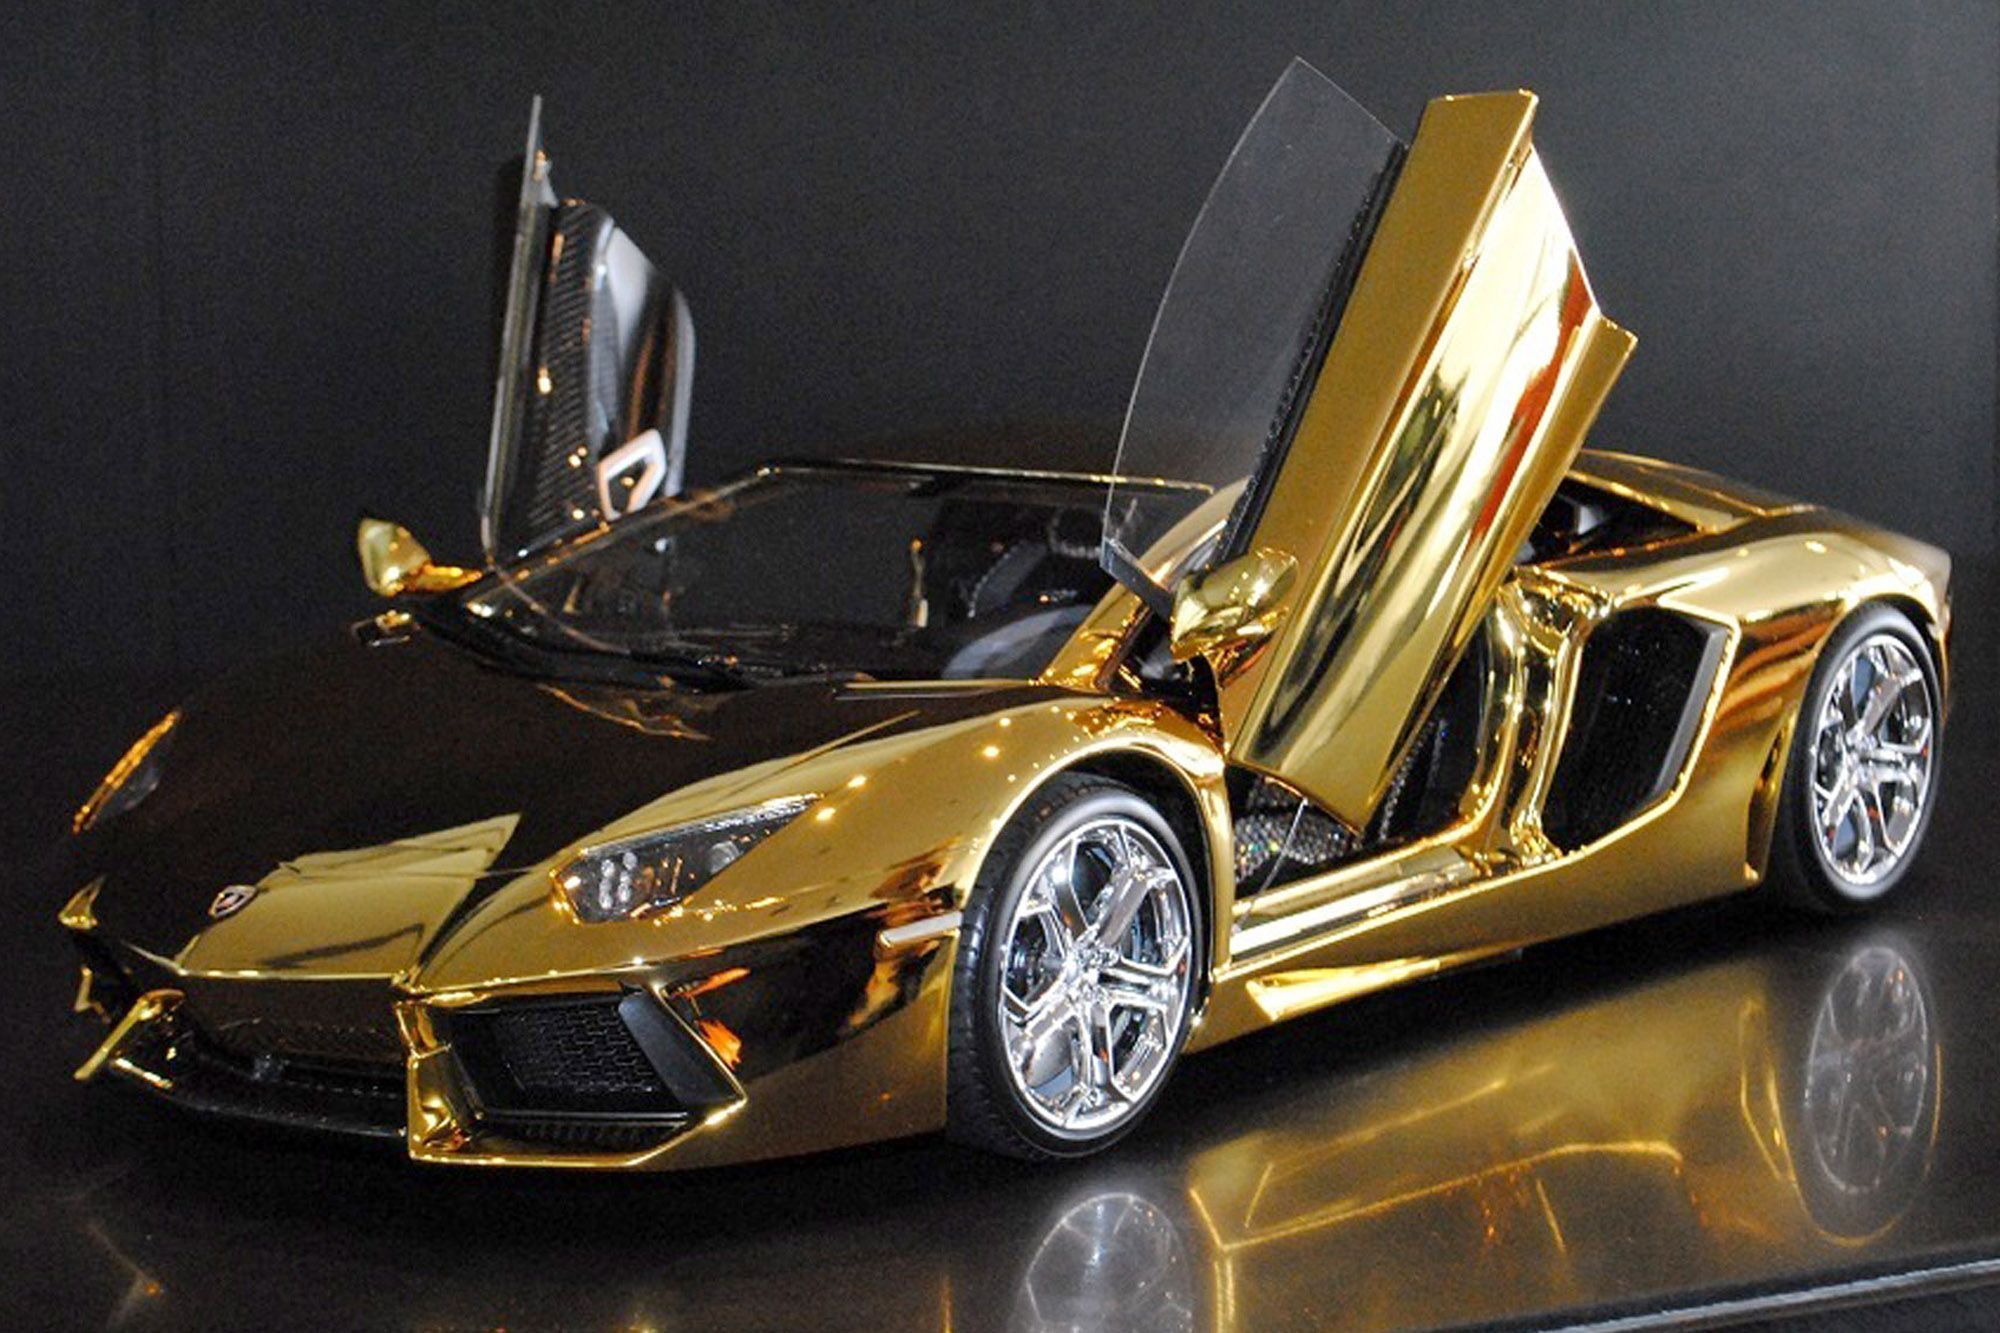 A solid gold Lamborghini and 6 other supercars